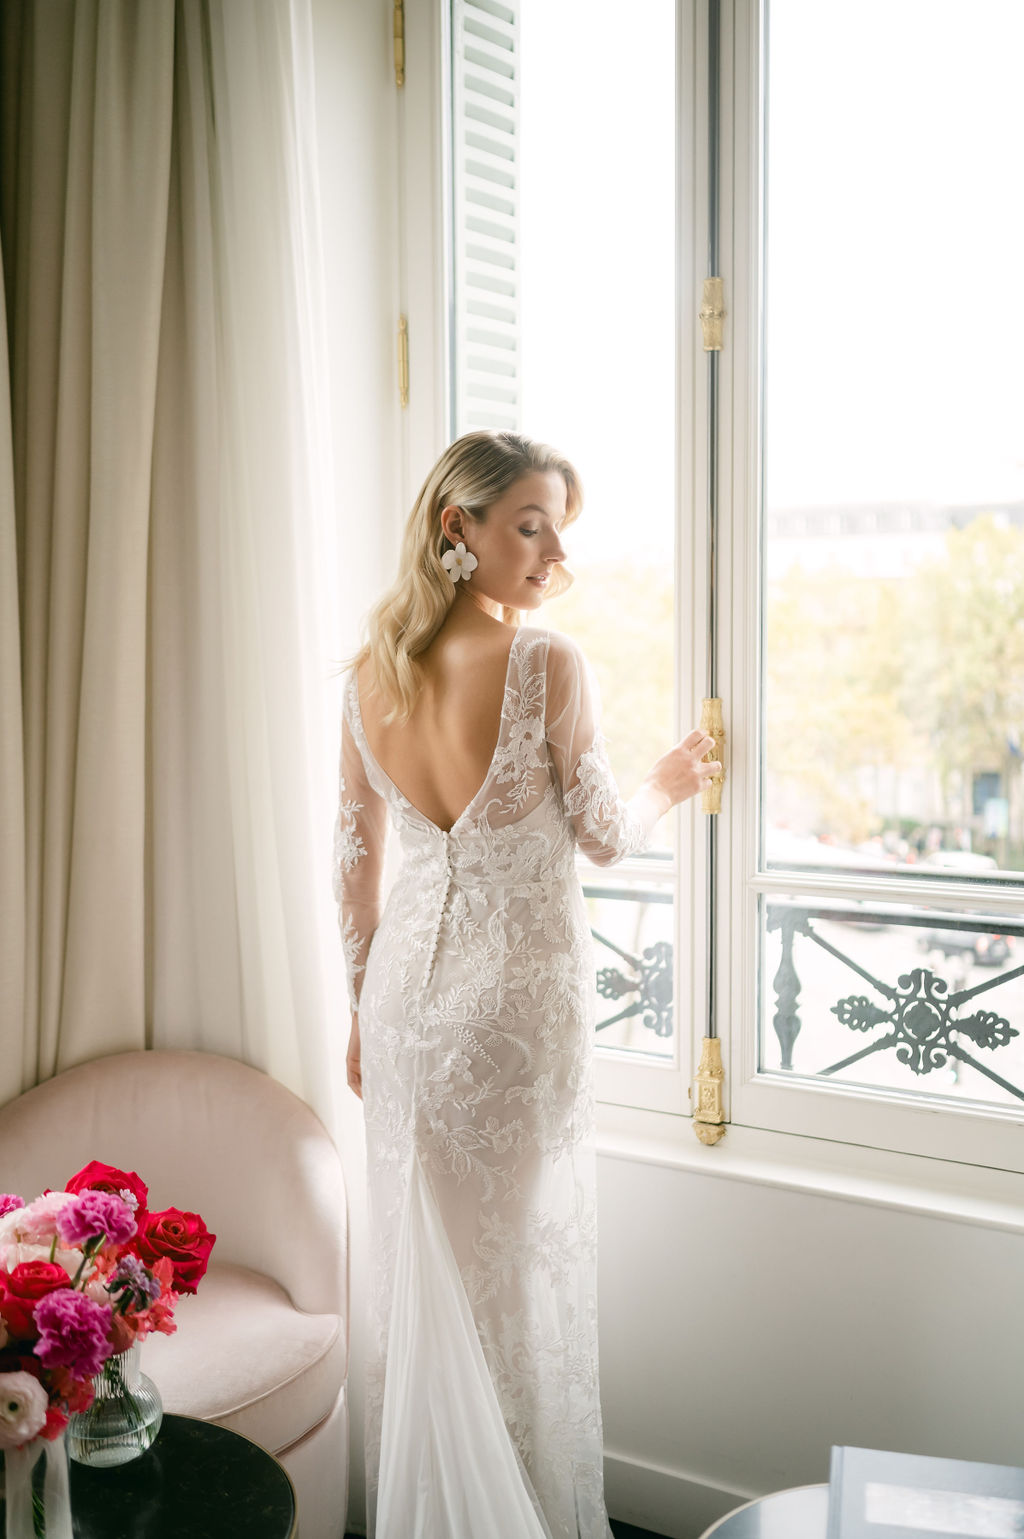 Elegant bride in timeless lace wedding gown 